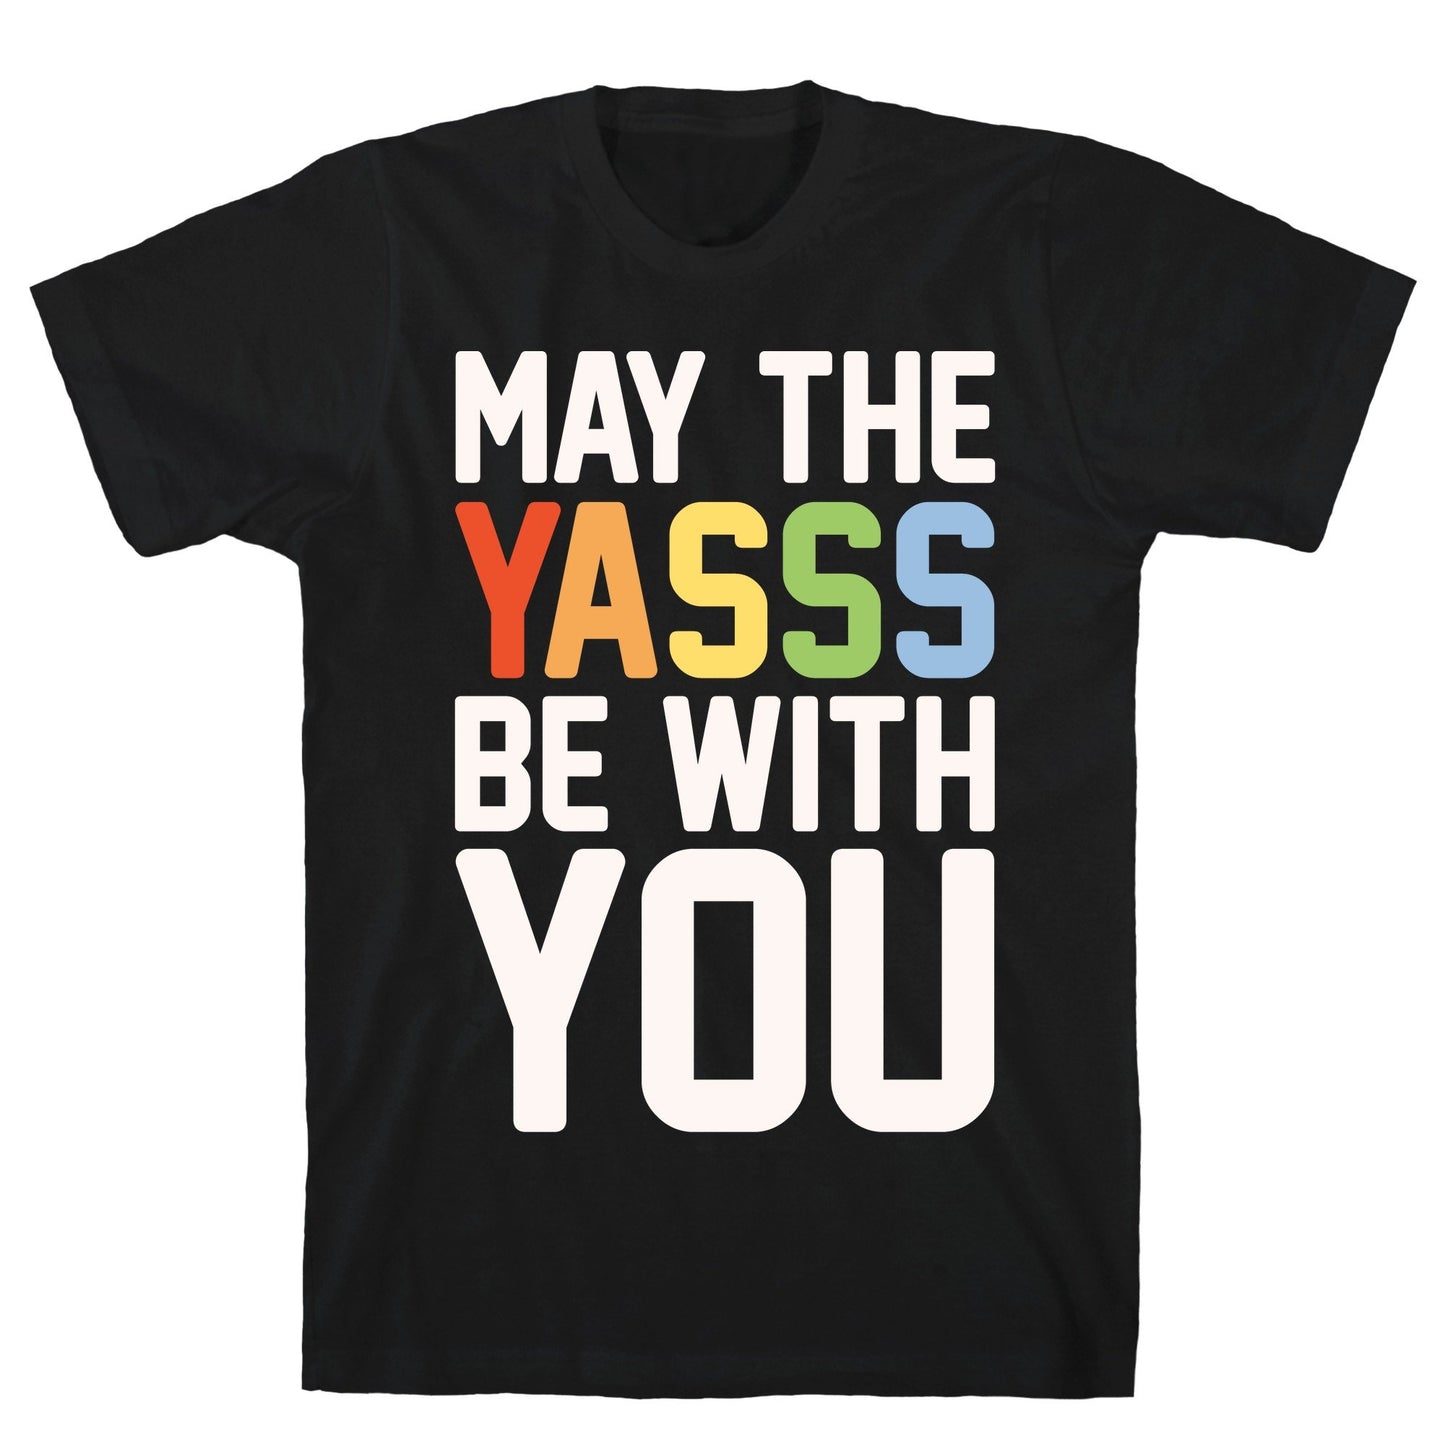 May The Yasss Be With You Parody Black Unisex Cotton Tee